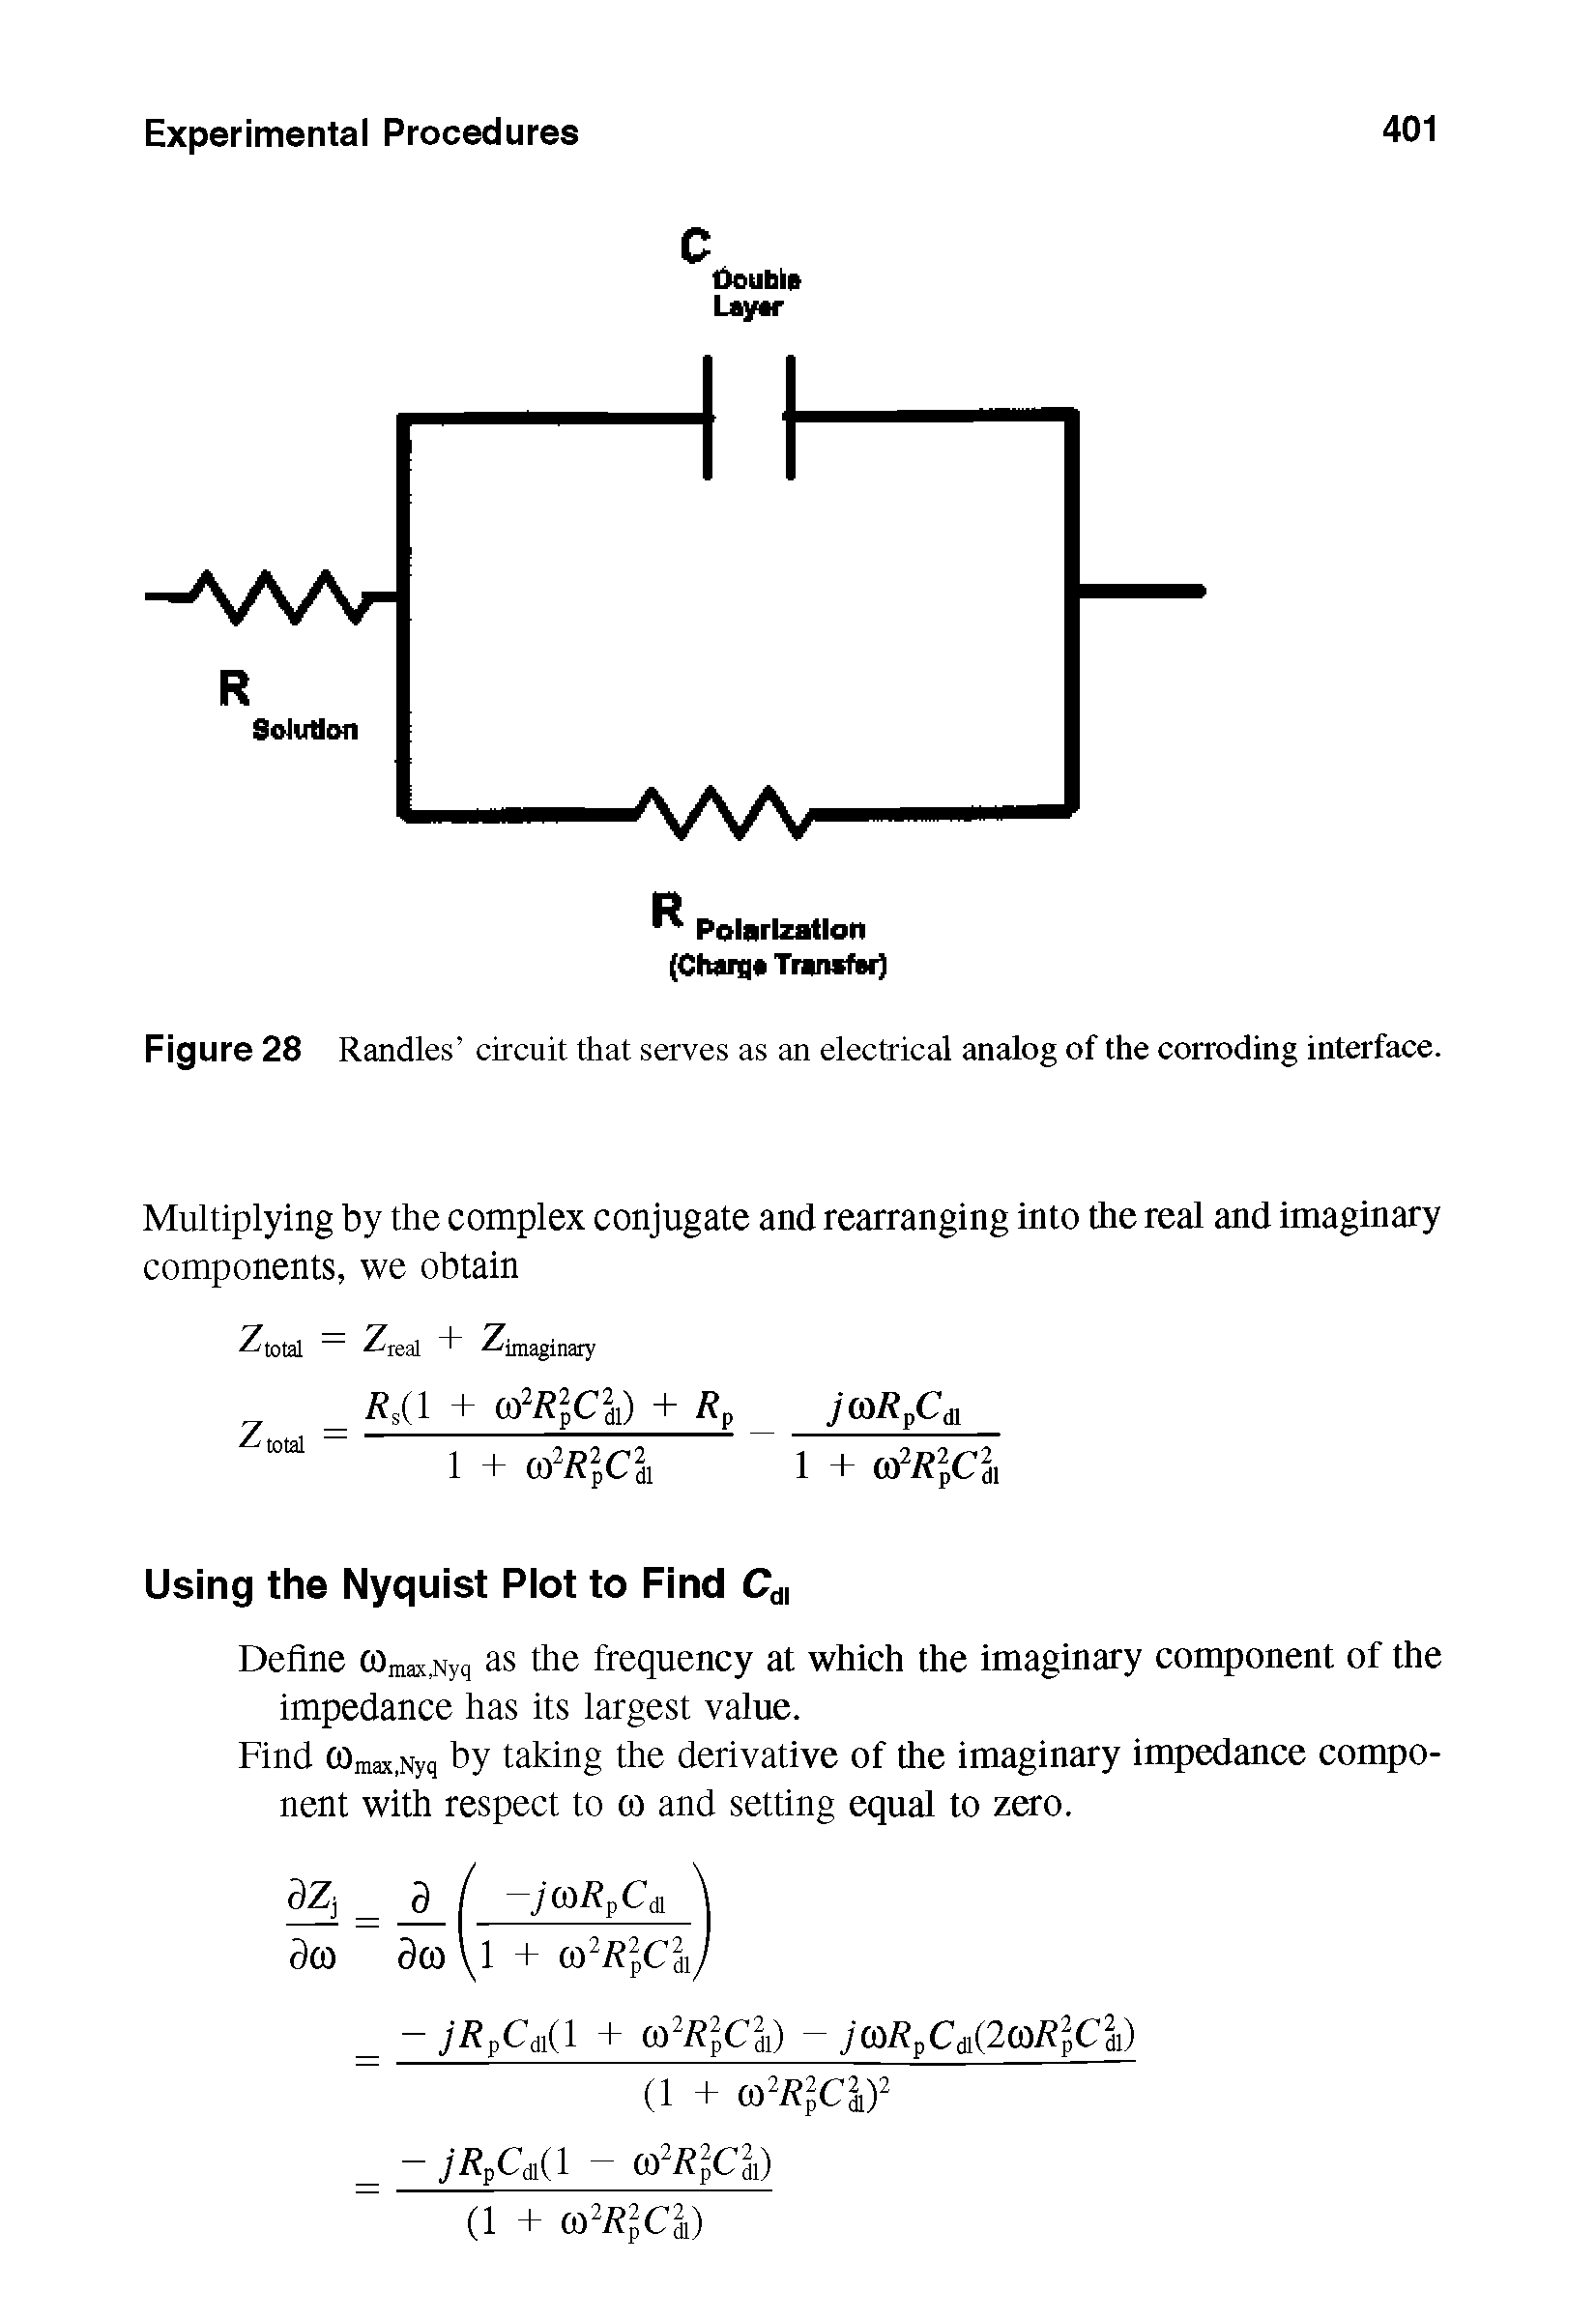 Figure 28 Randles circuit that serves as an electrical analog of the corroding interface.